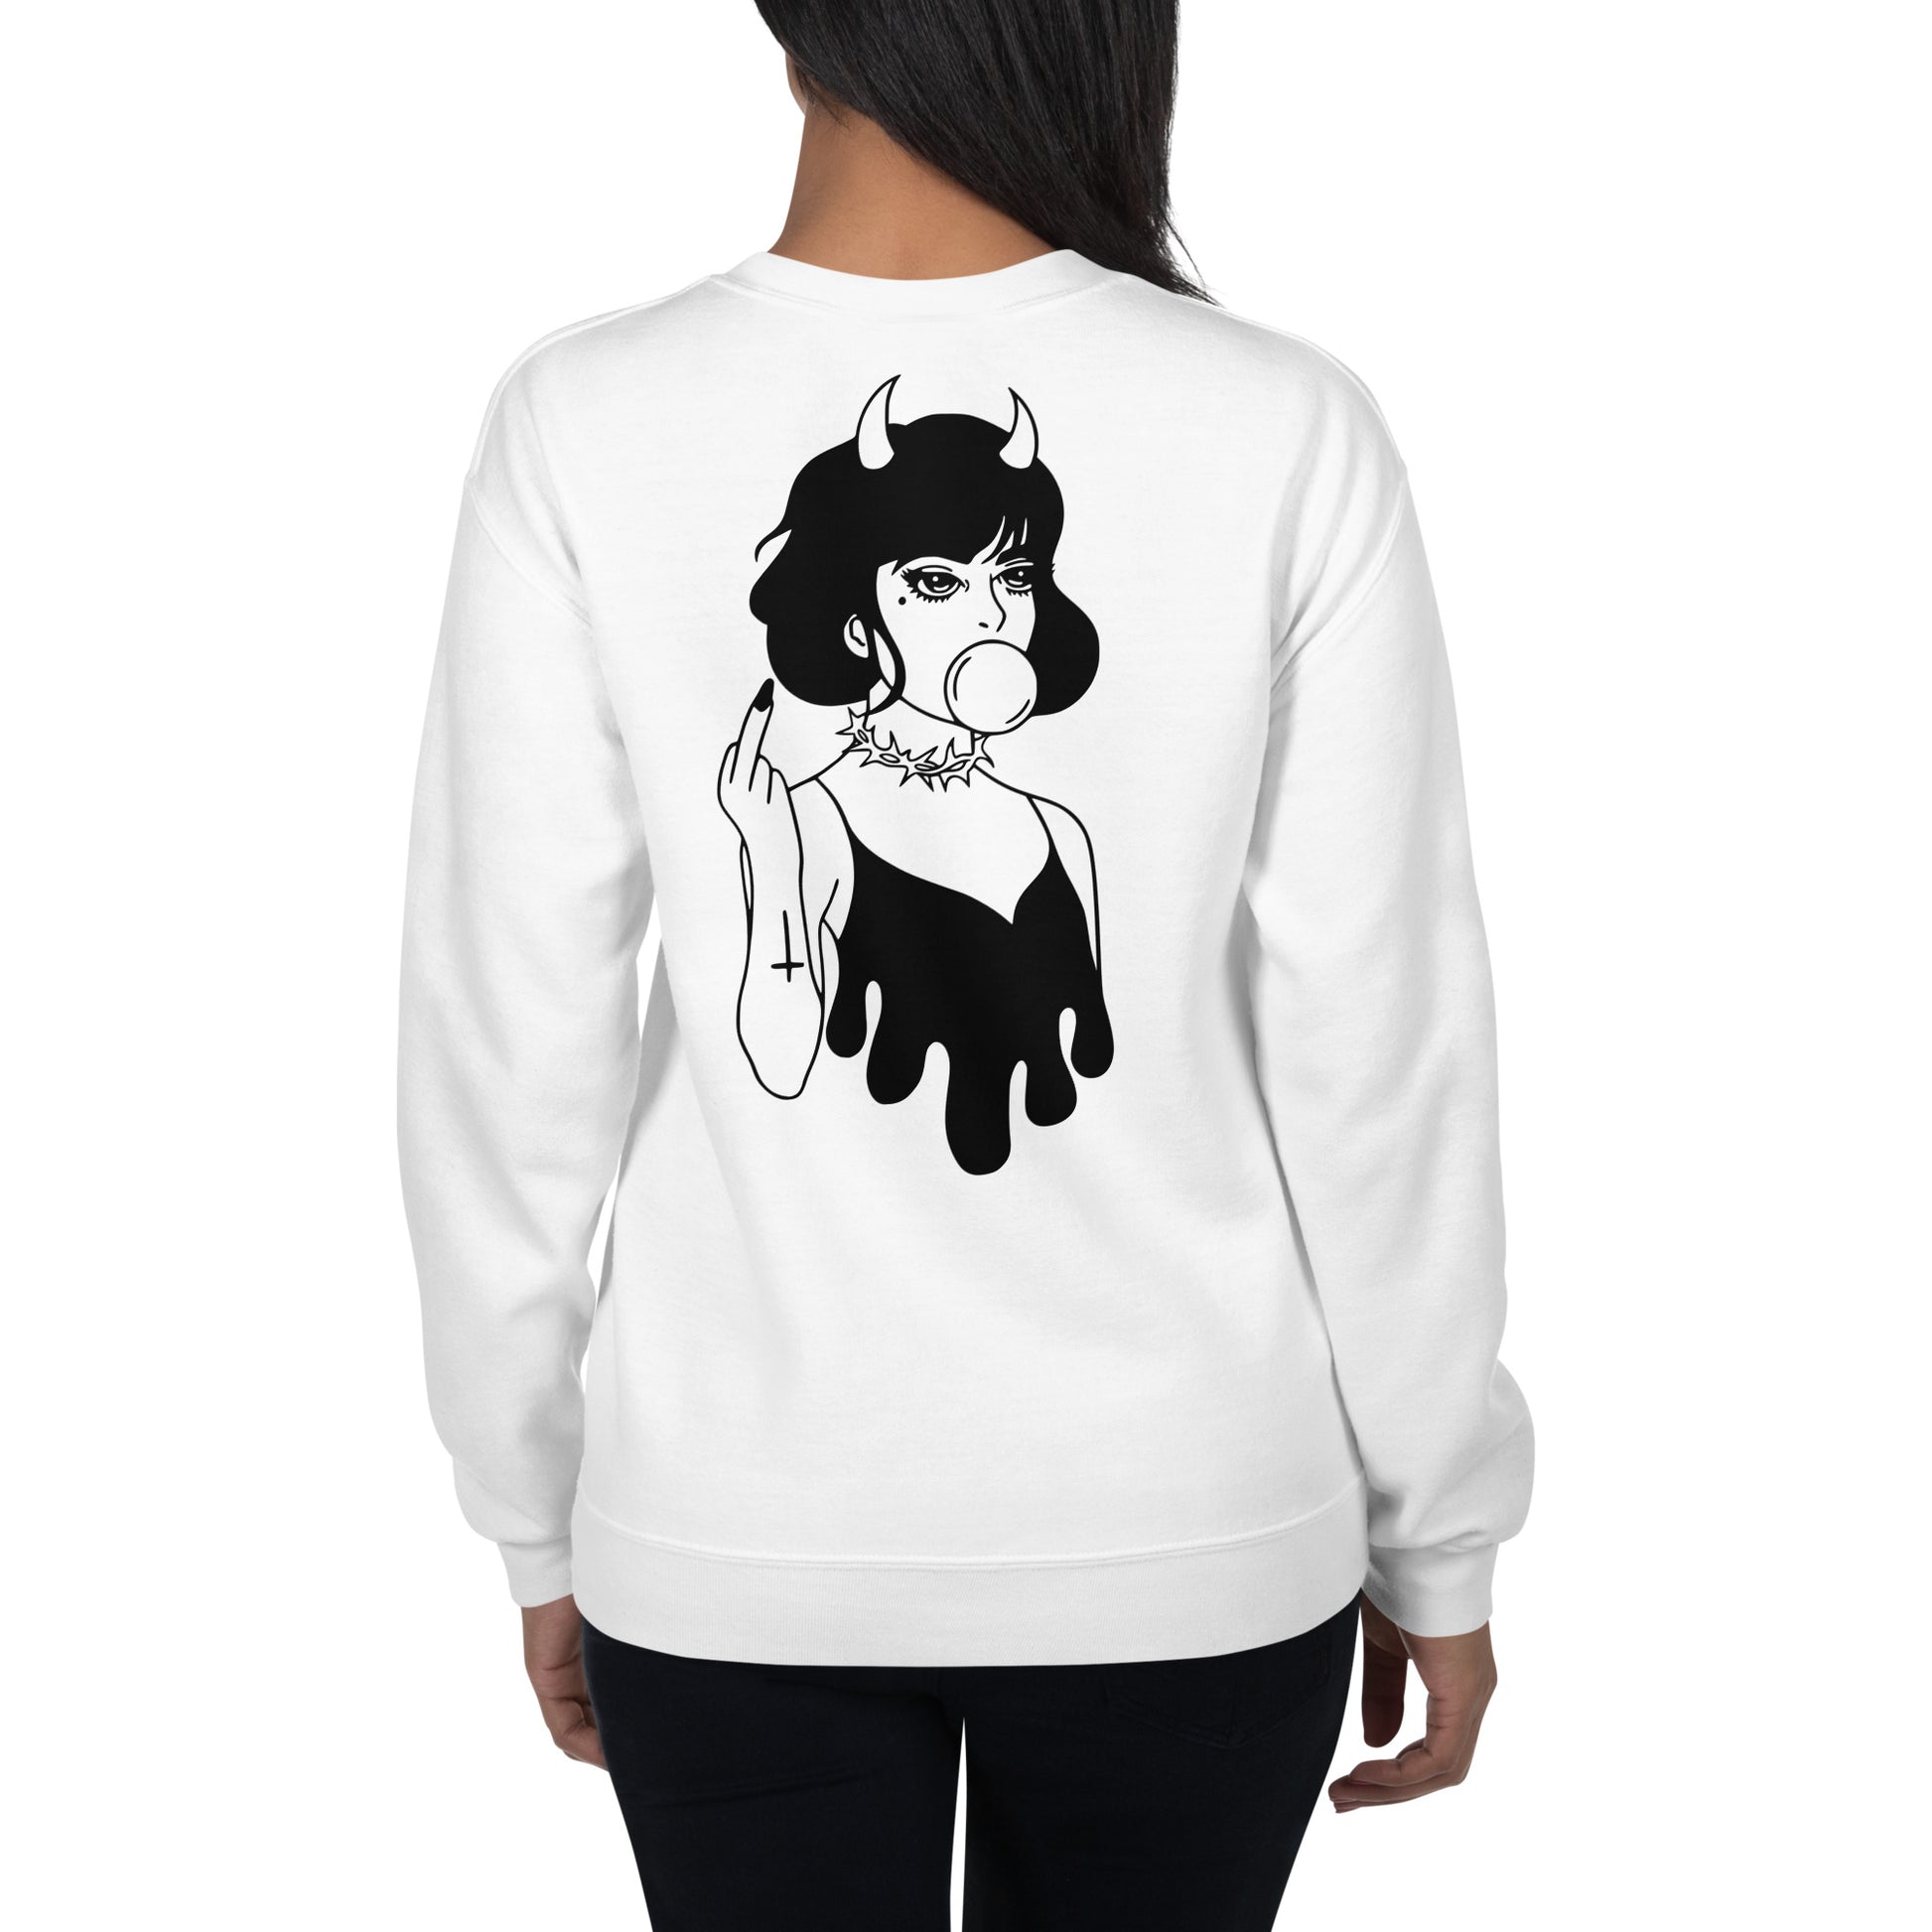 Middle Finger Sweatshirt / Goth Clothing / White Color